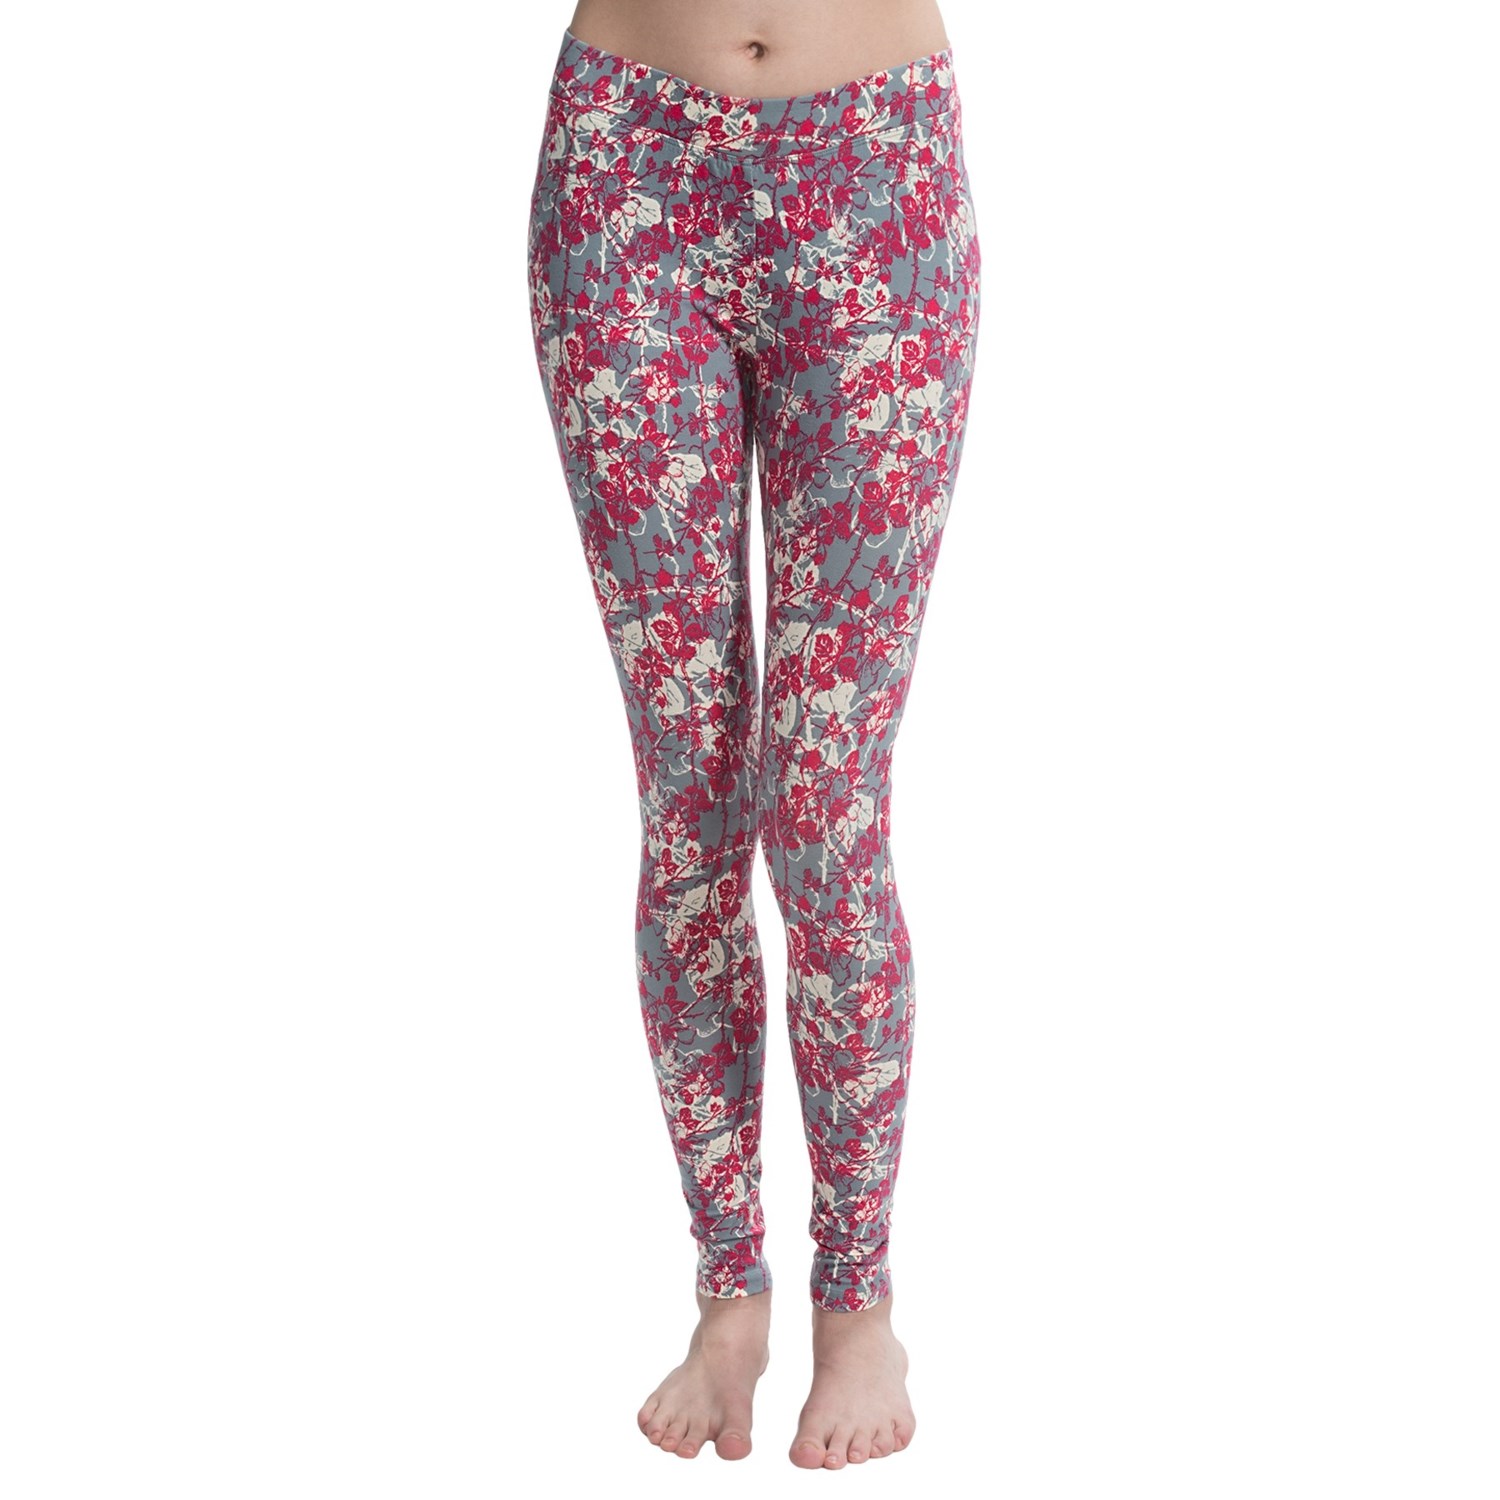 PACT Stretch Cotton Leggings (For Women) in Bramble